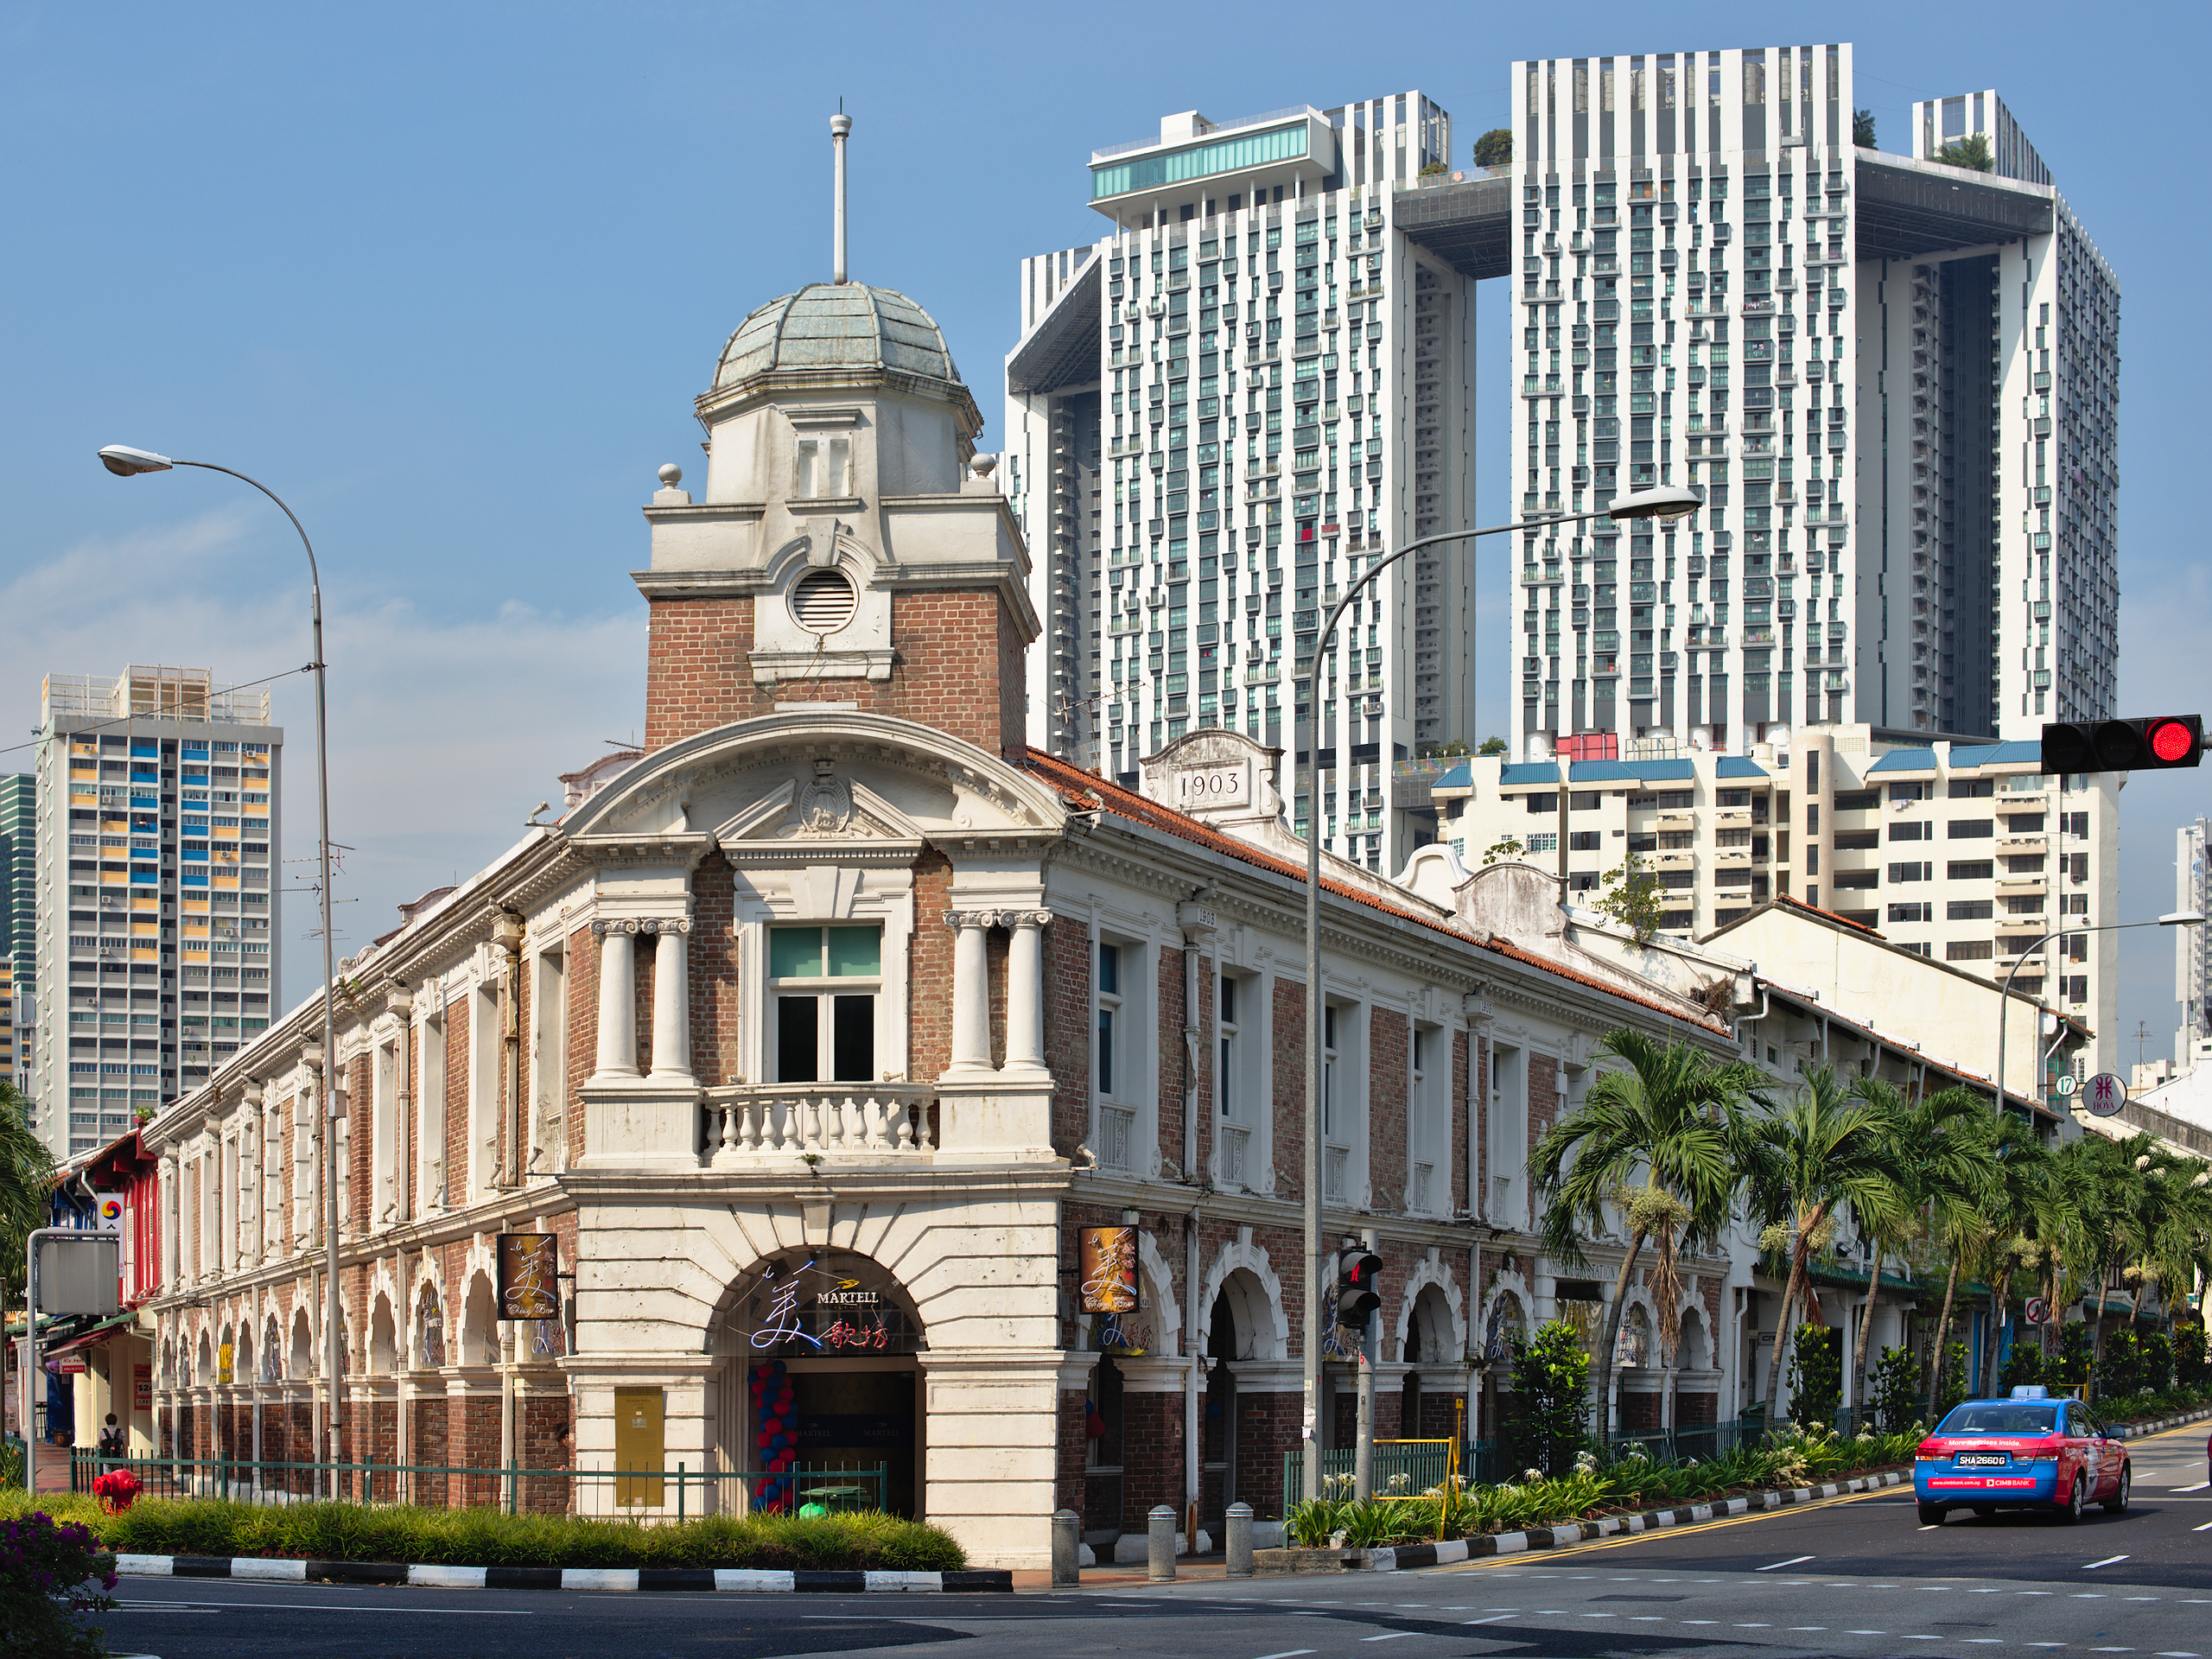 Jinrikisha station located at the junction of Neil Road and Tanjong Pagar Road